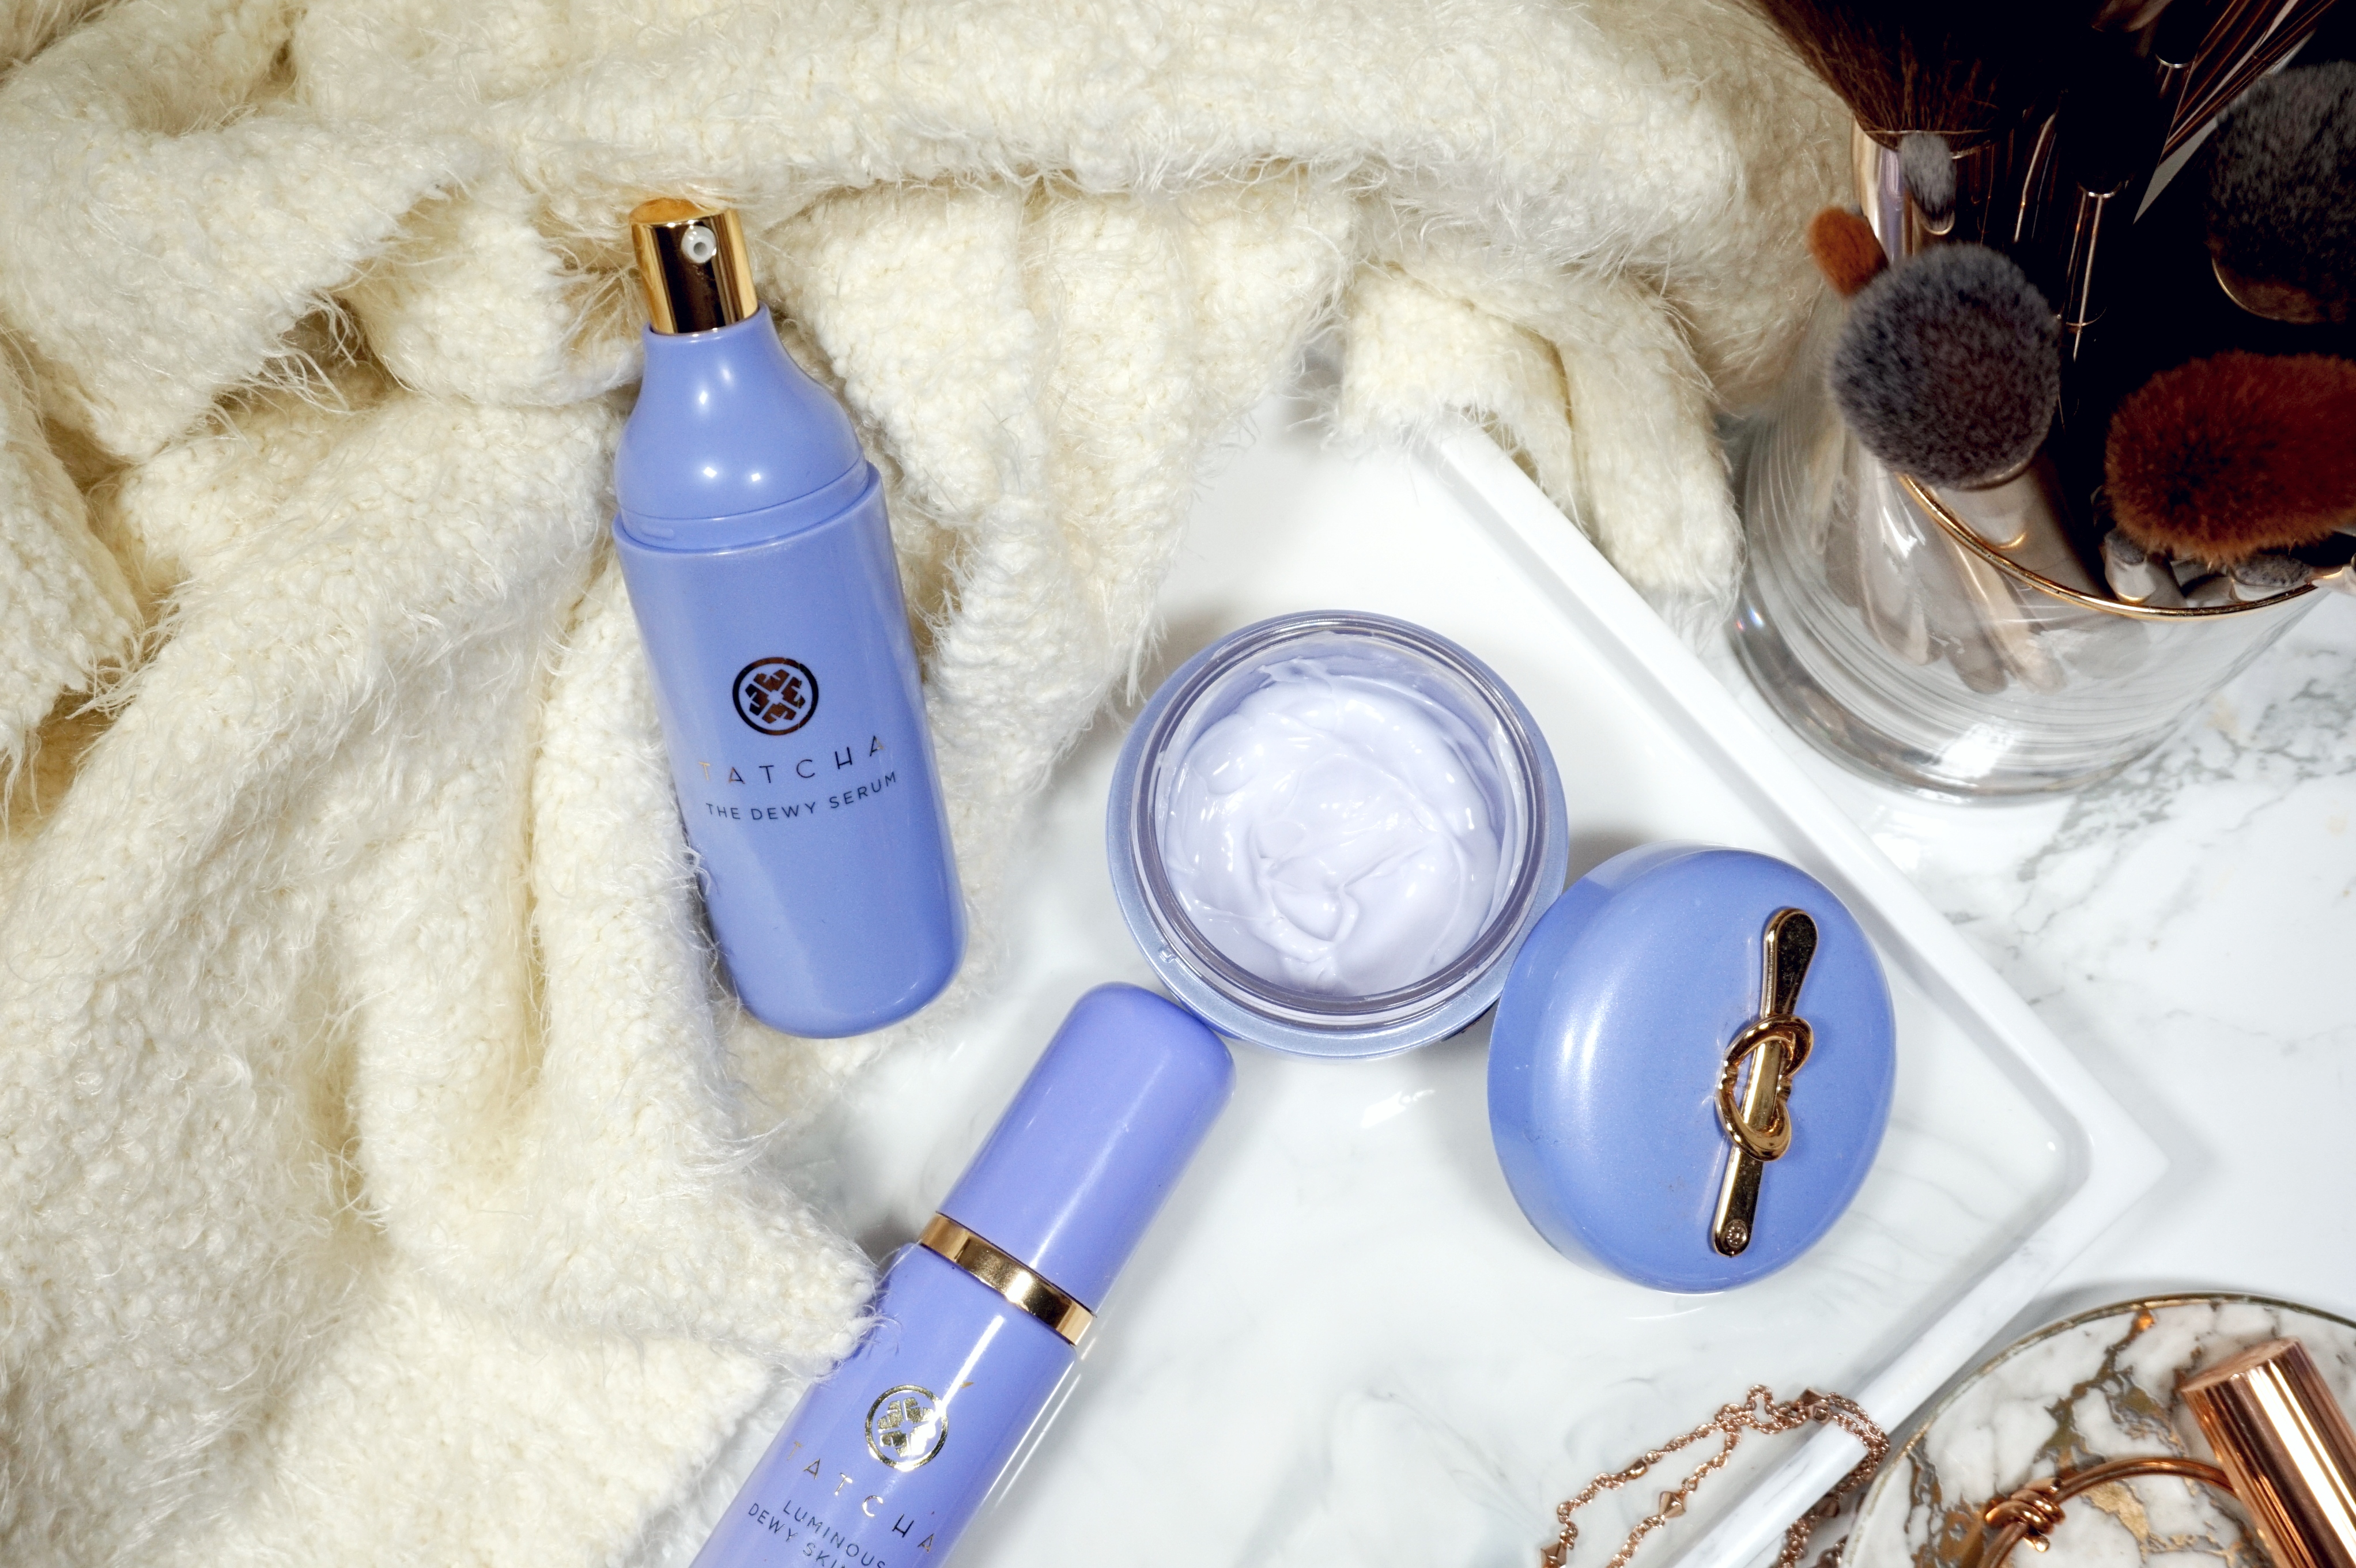 Tatcha The Dewy Serum Resurfacing and Plumping Treatment Review